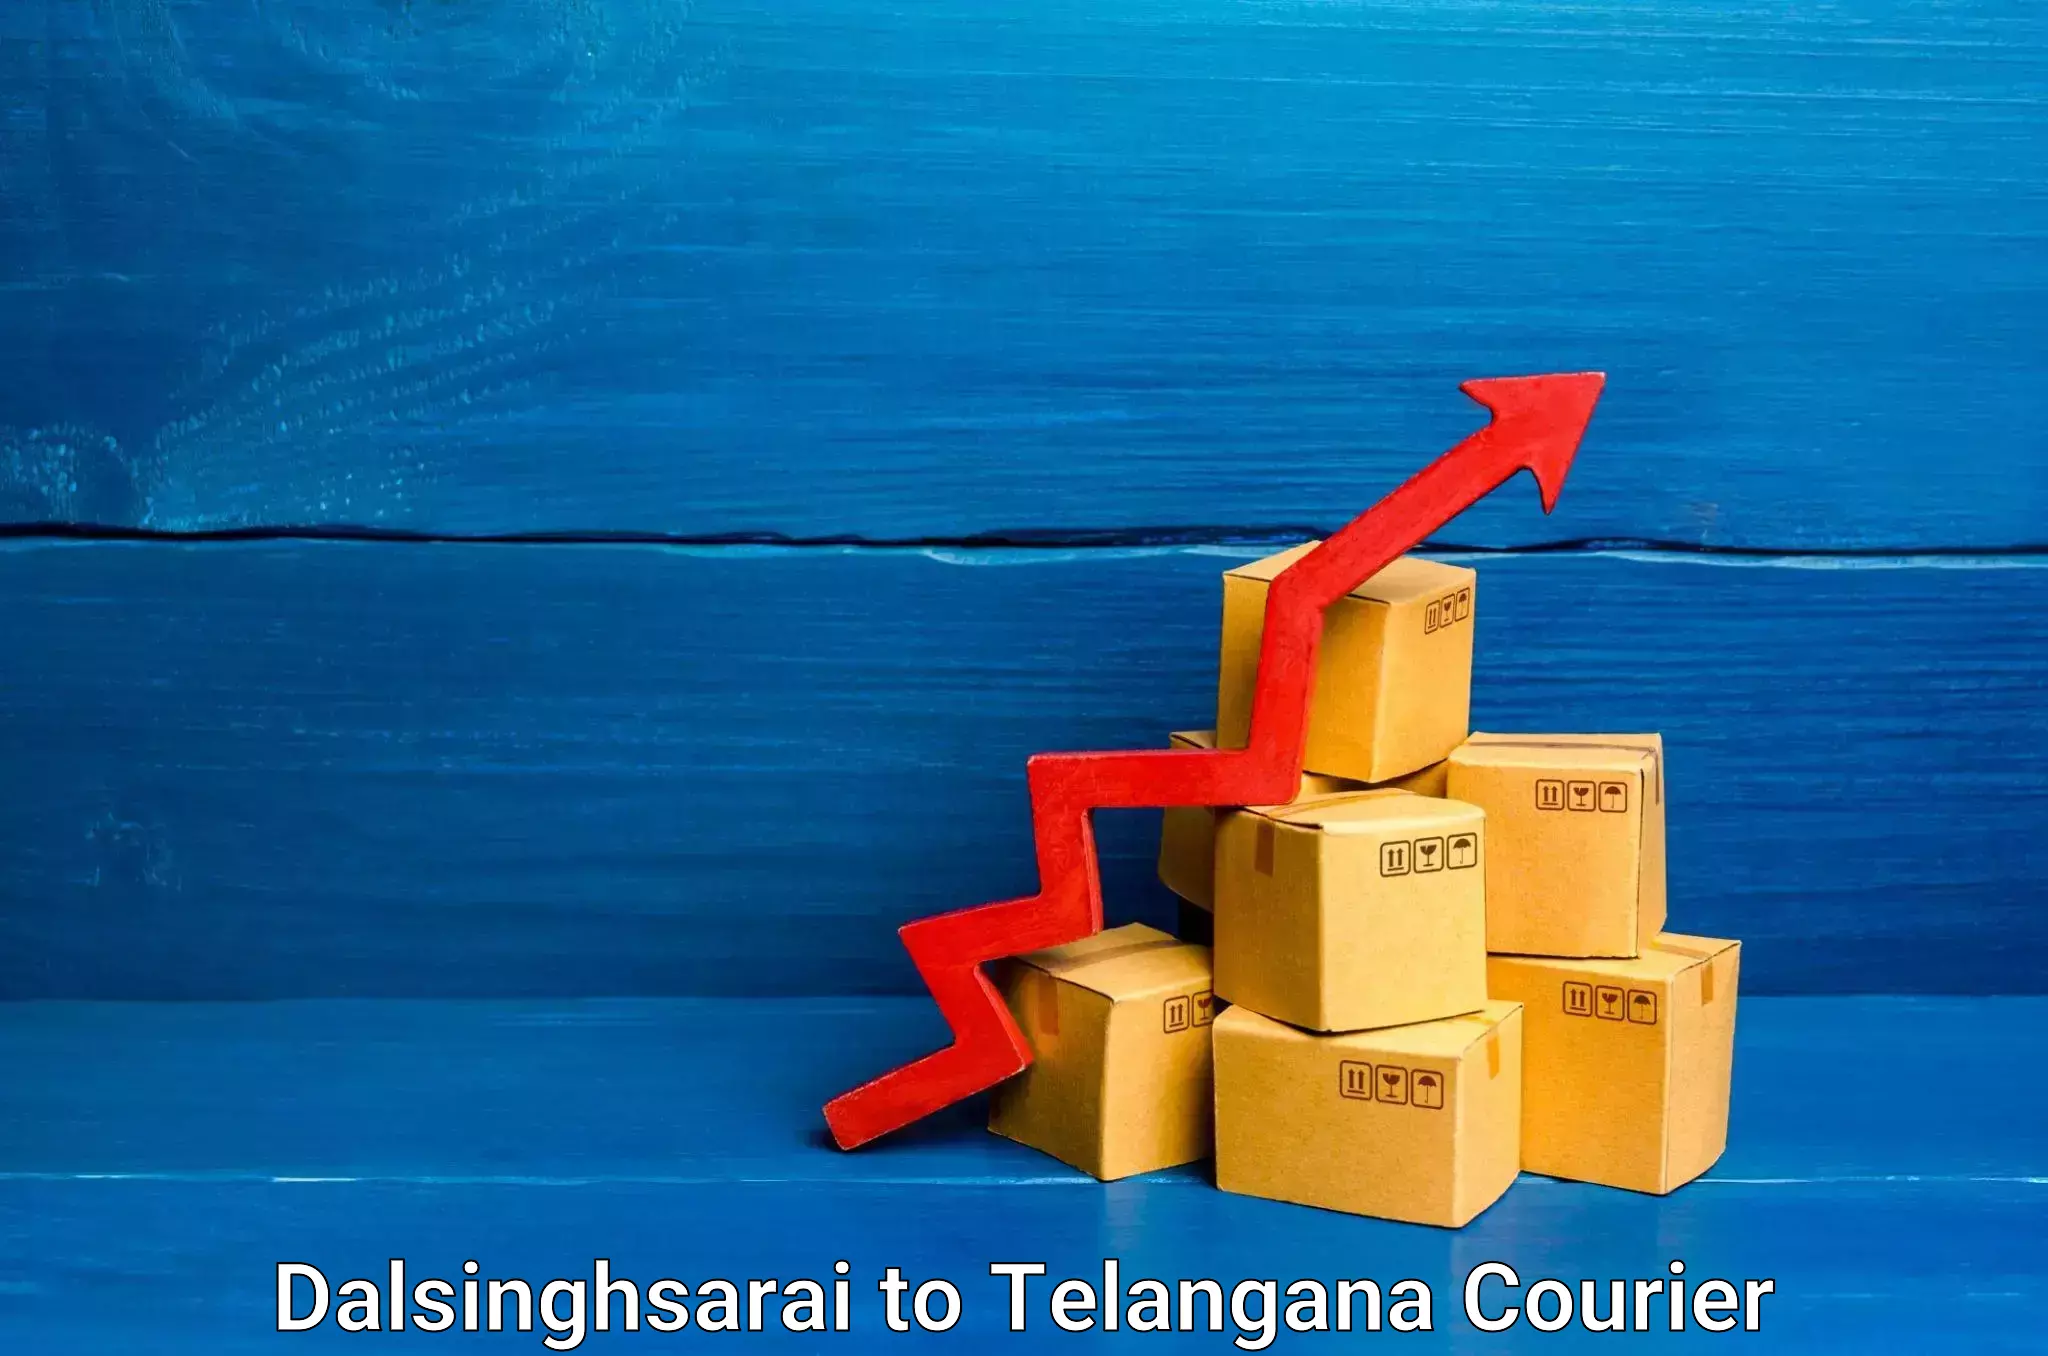 Professional packing and transport in Dalsinghsarai to Mancherial